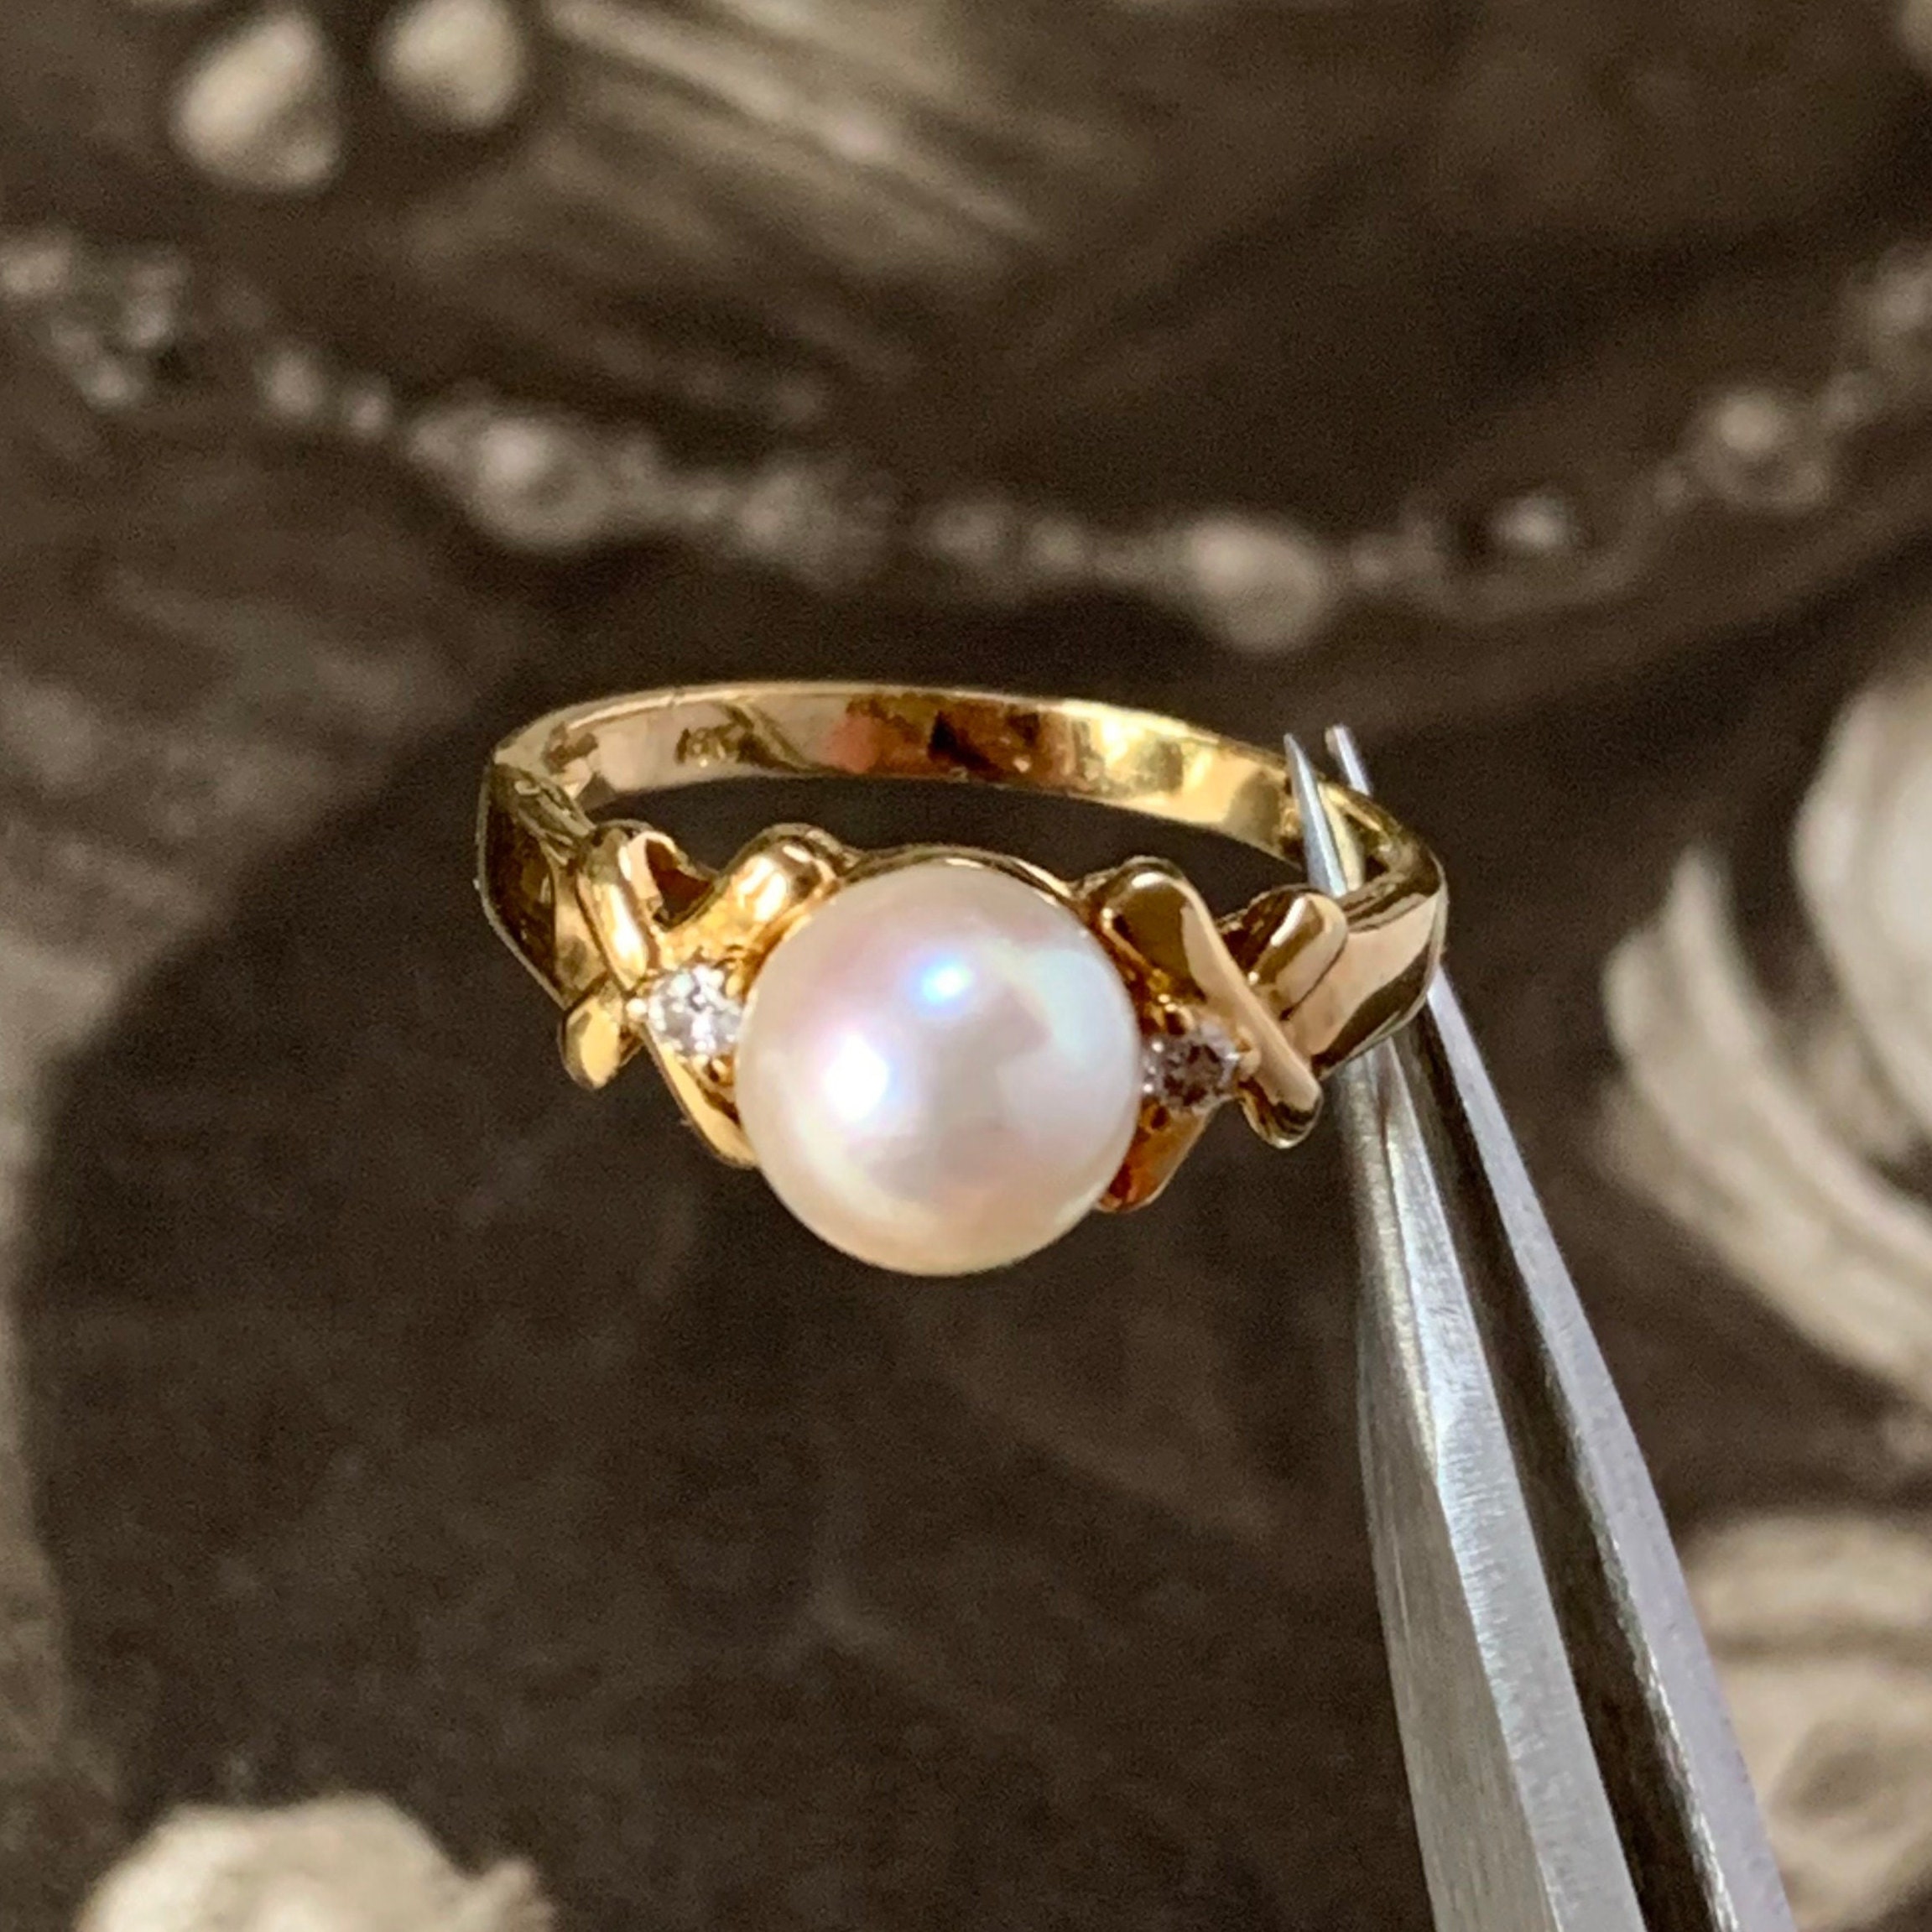 Pearl Ring Of Outstanding Quality, The Akoya Pearl Is Stunning & Measures 7.3 Mm Complimented By Brilliant Cut Diamonds